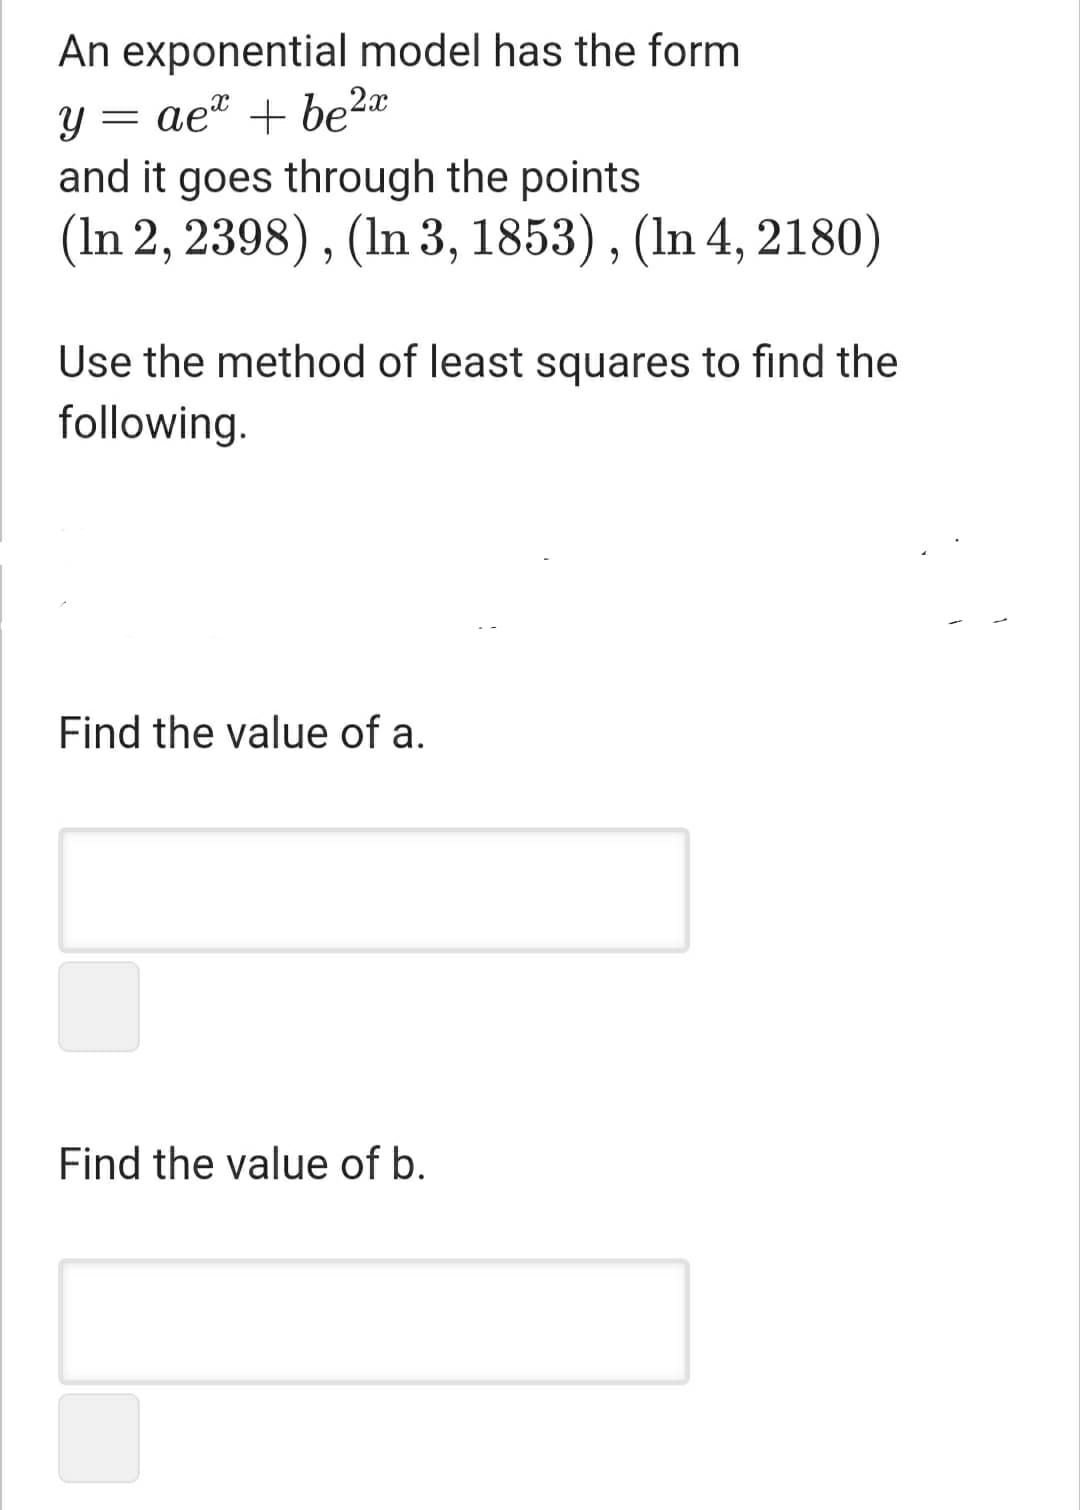 An exponential model has the form
ae" + be2a
and it goes through the points
(In 2, 2398), (In 3, 1853), (In 4, 2180)
Use the method of least squares to find the
following.
Find the value of a.
Find the value of b.
